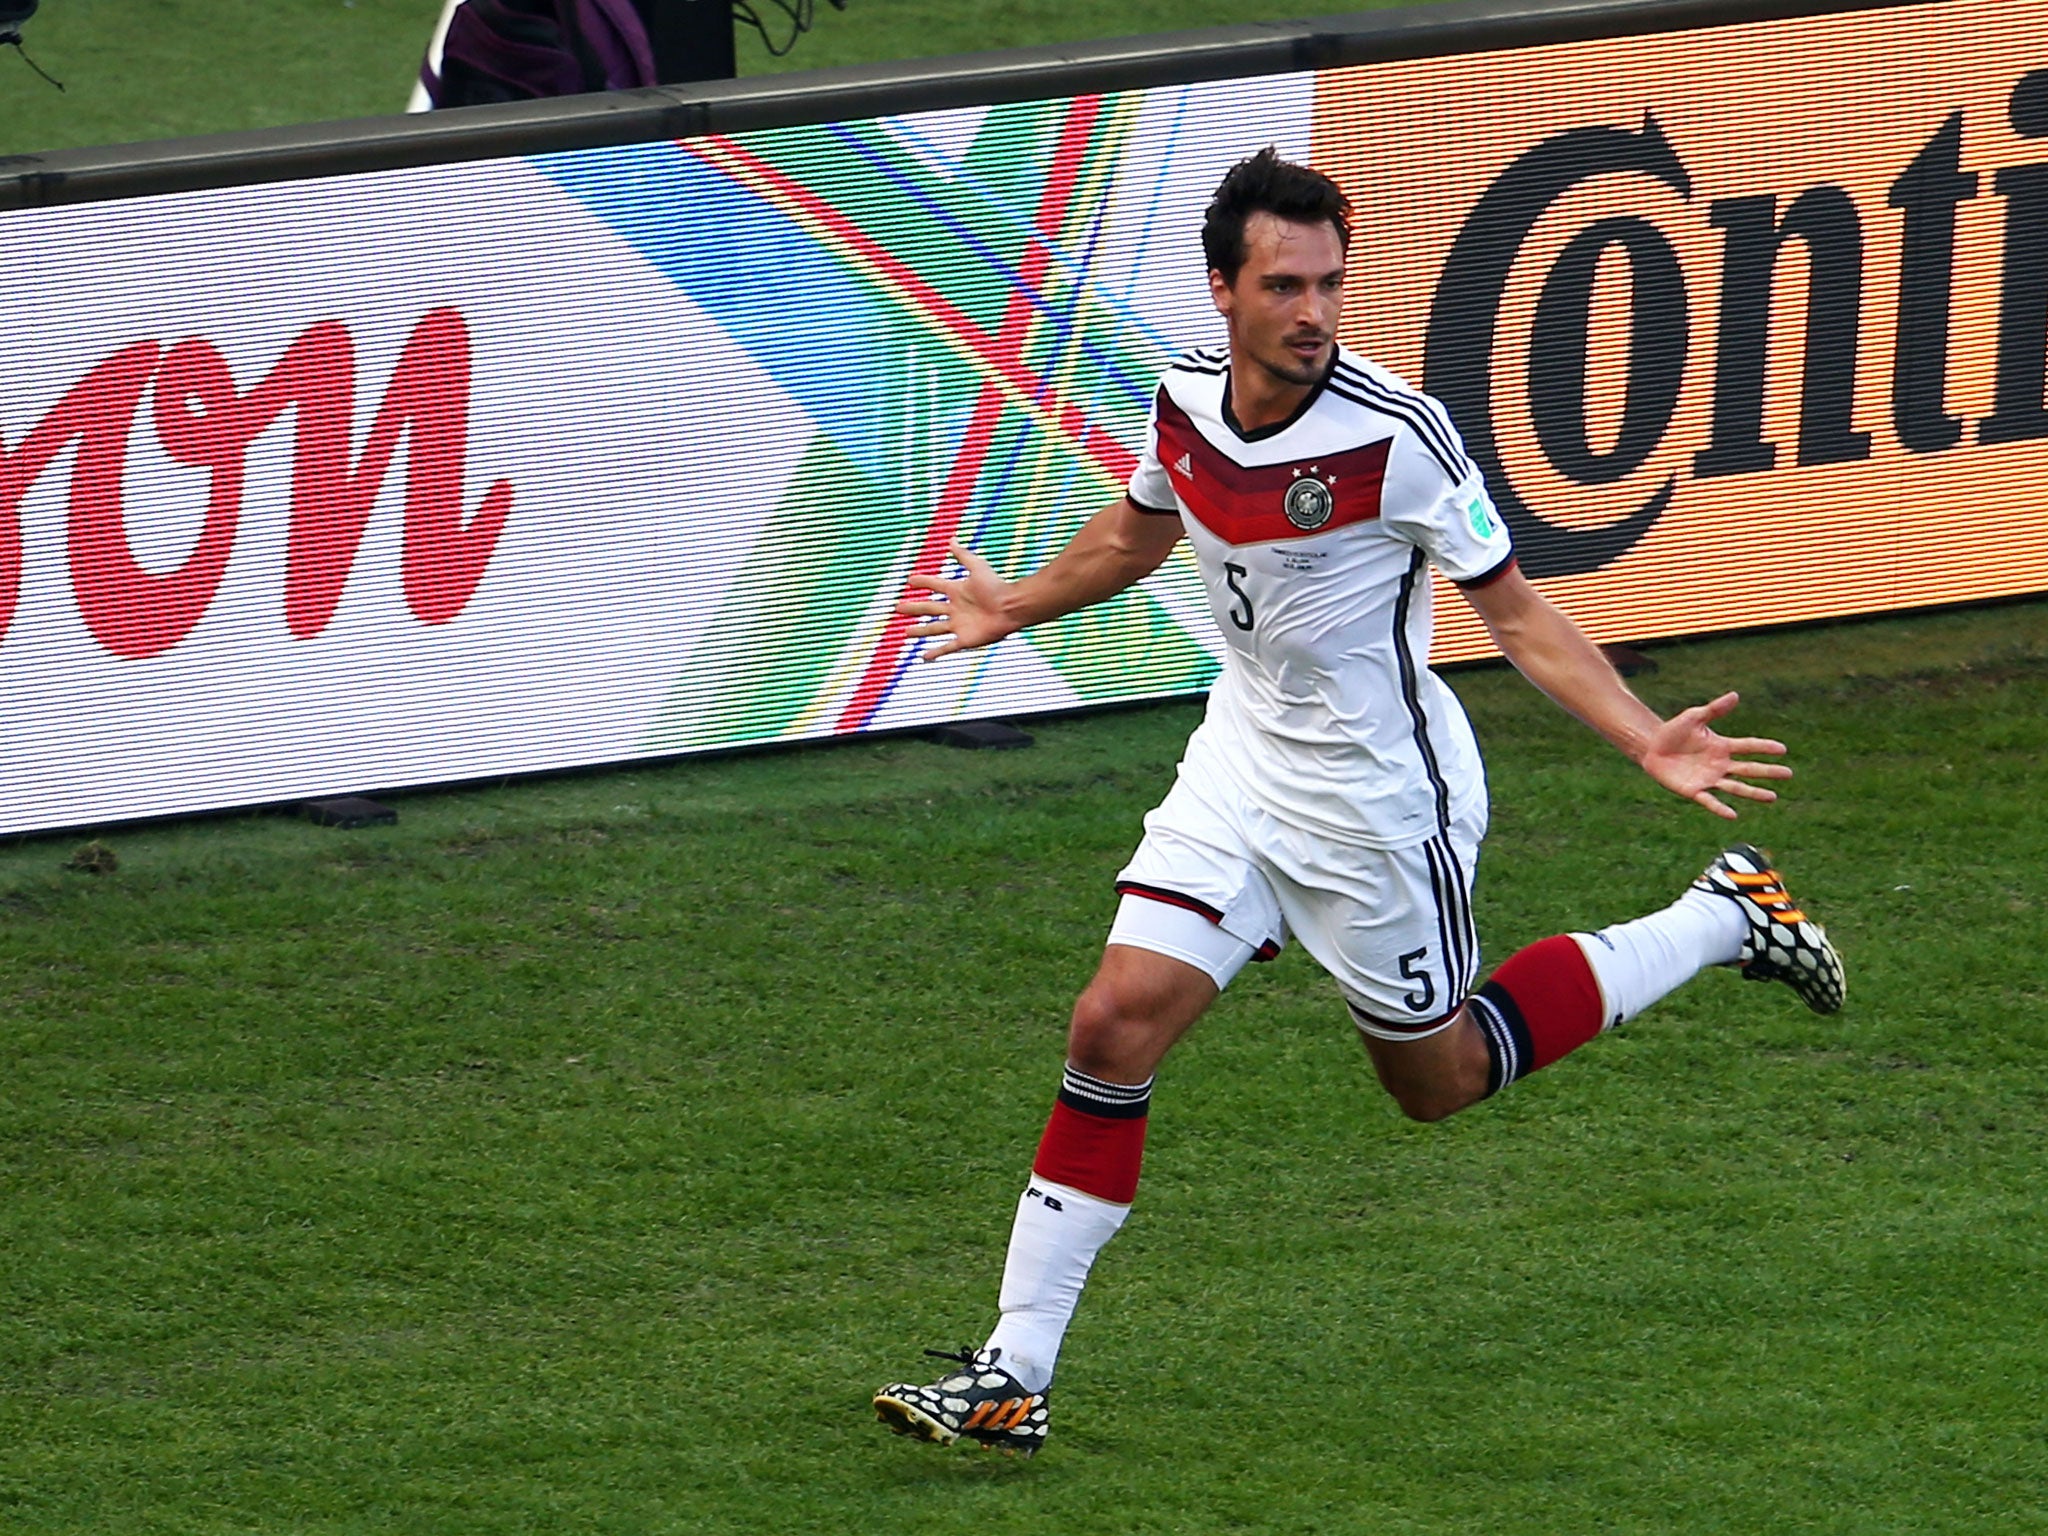 Hummels scored in the quarter-final against France but could miss Sunday's final at the Maracana through injury